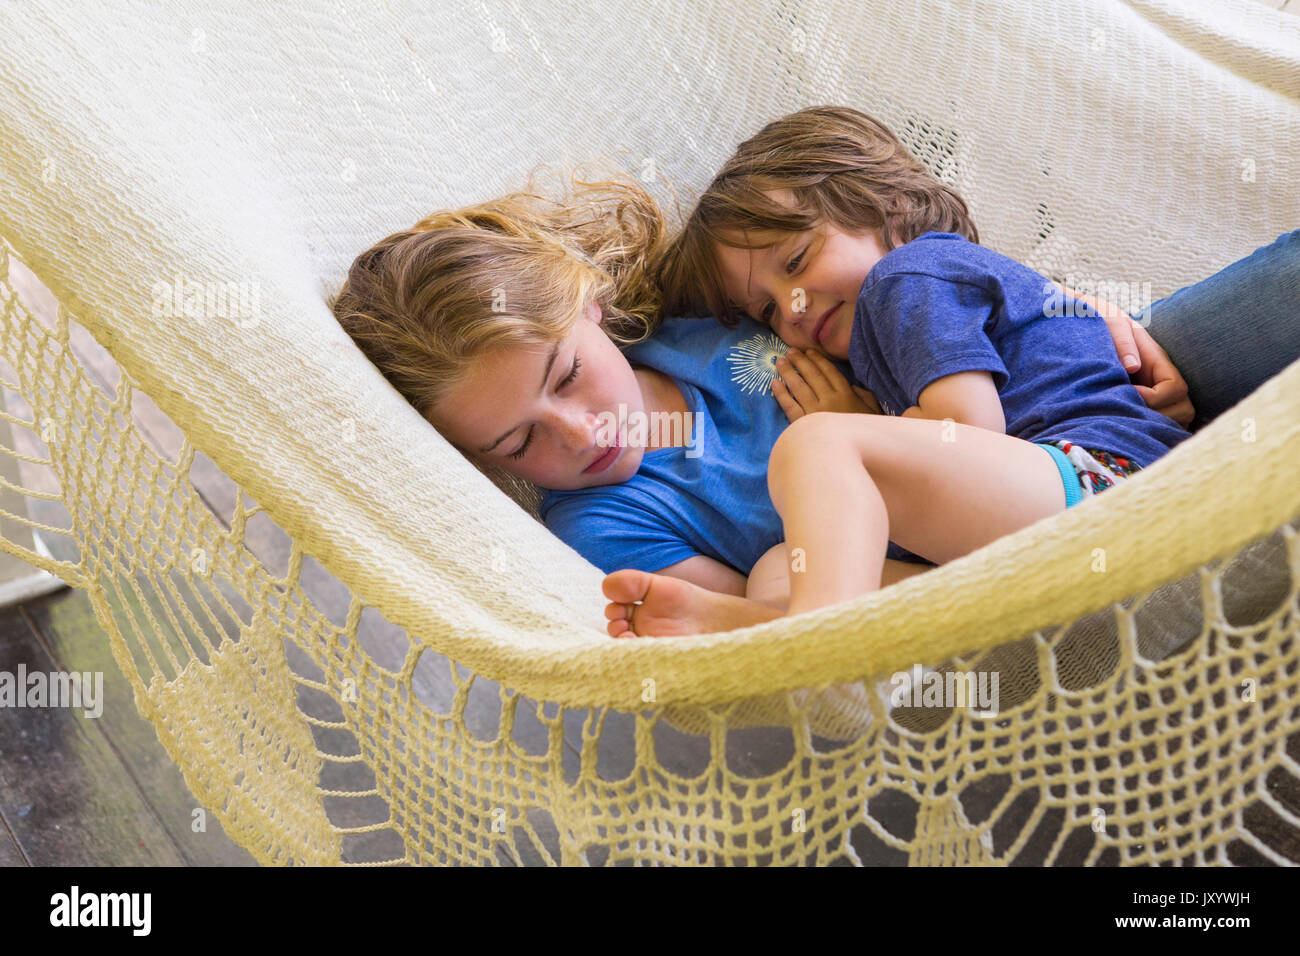 Caucasian brother and sister cuddling in hammock Stock Photo